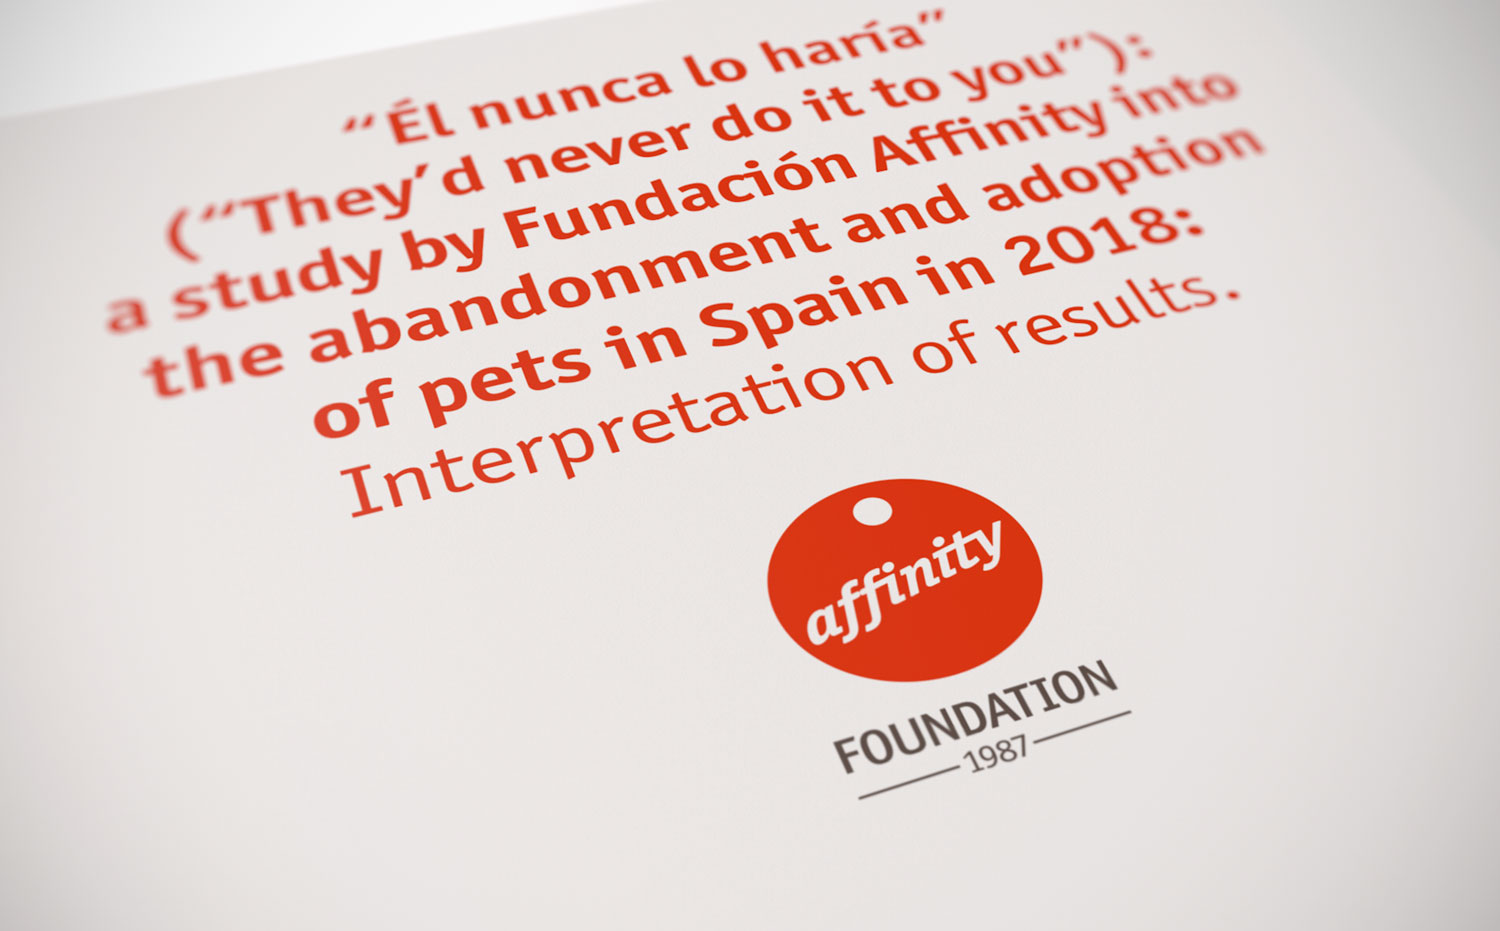 (“They’d never do it to you”): a study by Fundación Affinity into the abandonment and adoption of pets in Spain in 2018